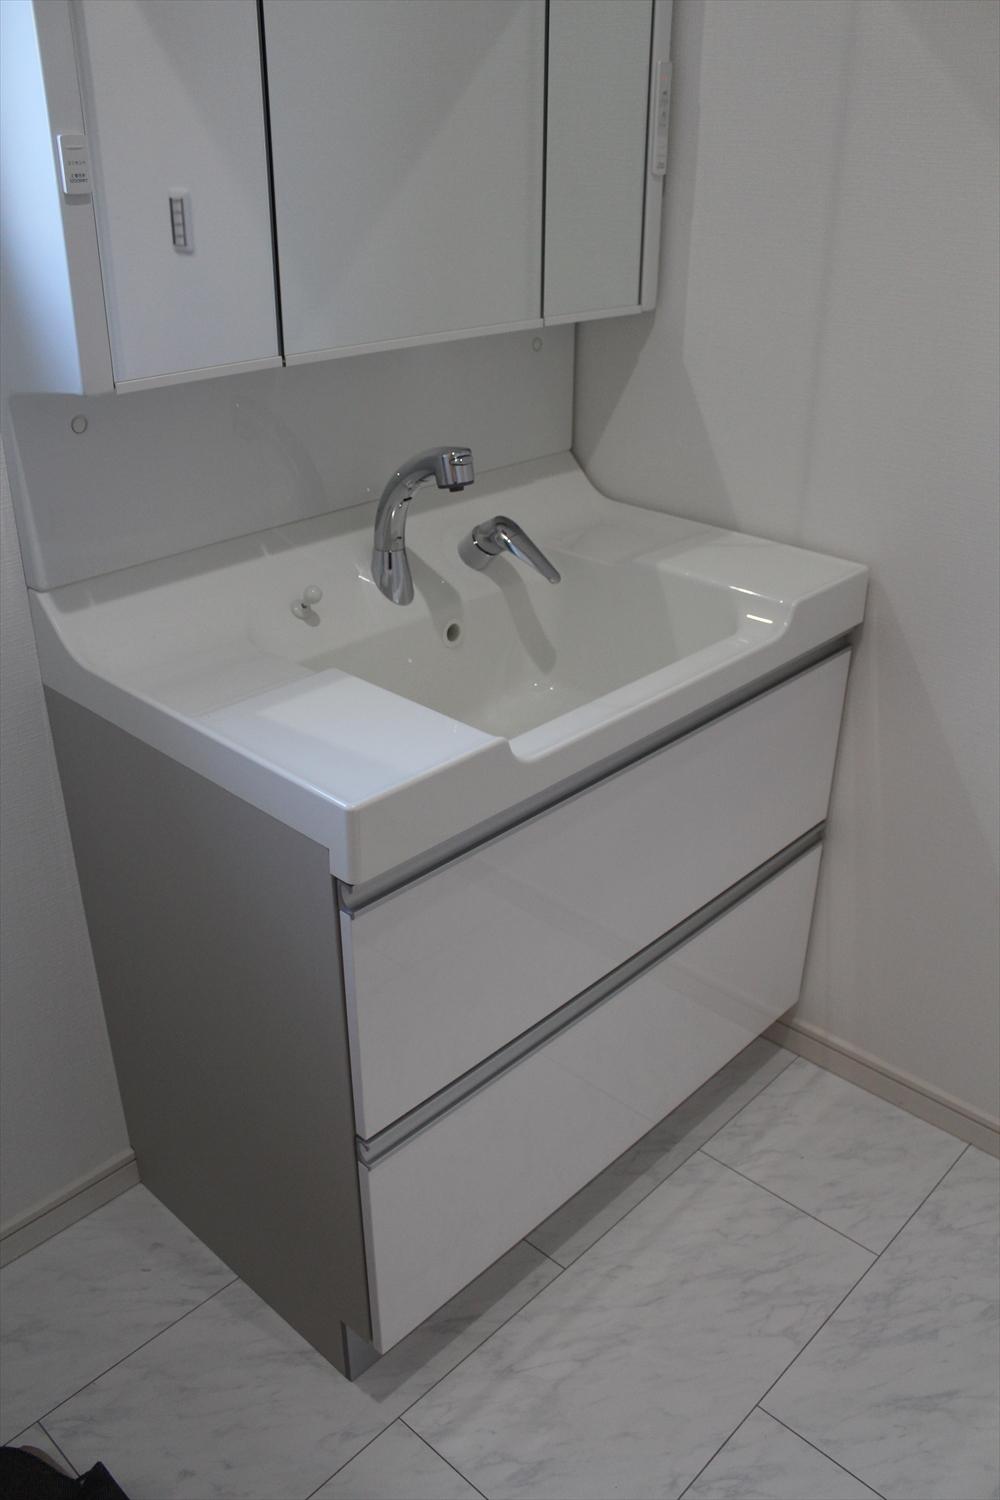 Same specifications photos (Other introspection). Bathroom vanity